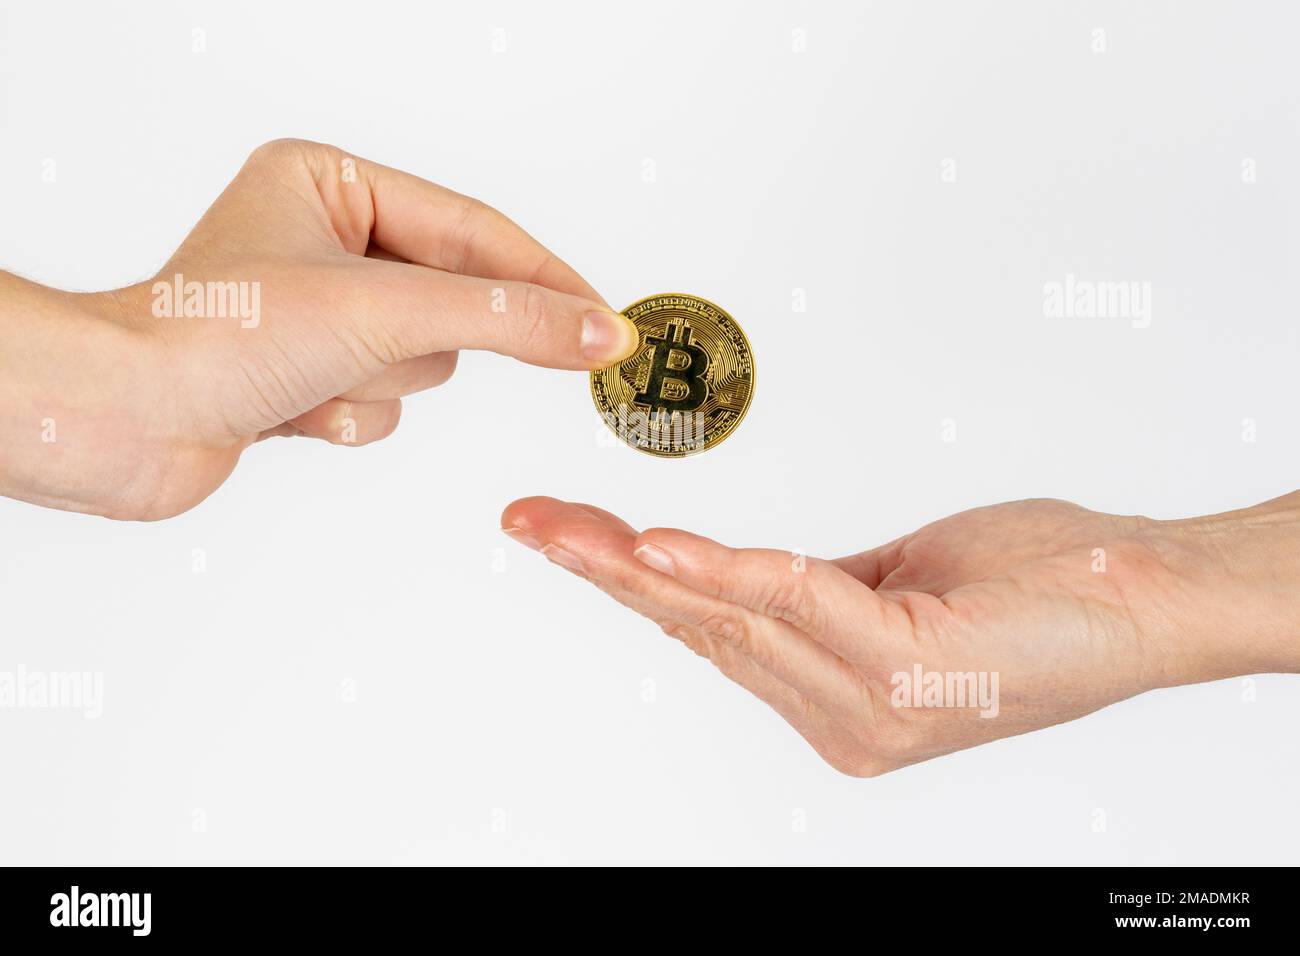 woman's hand giving a bitcoin coin to another woman on white background Stock Photo